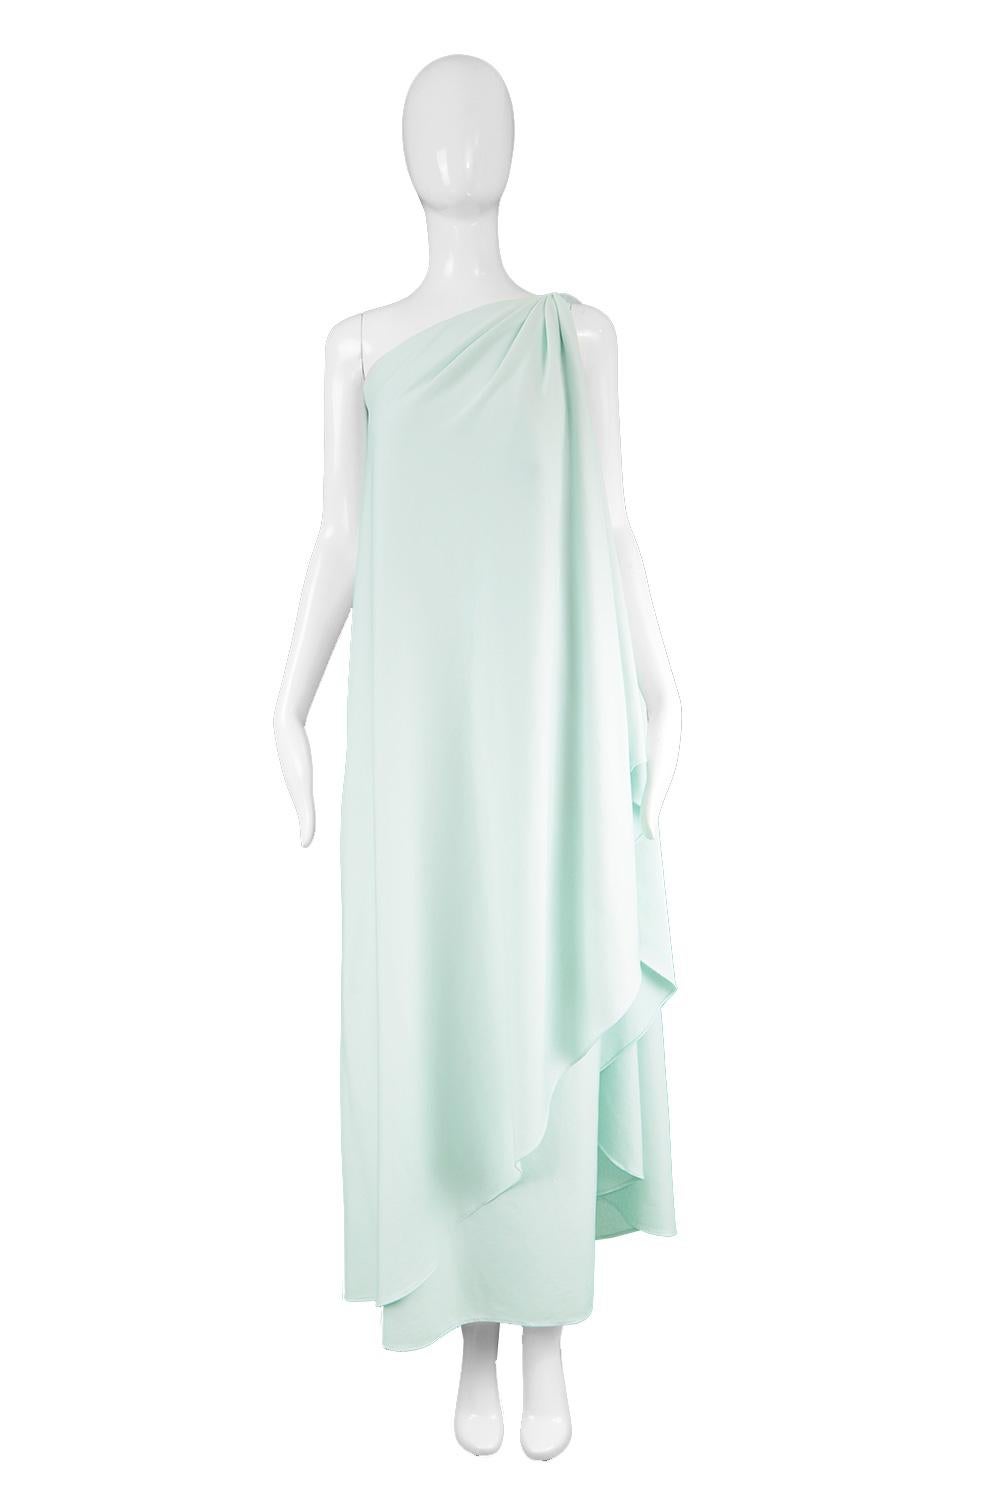 Halston Vintage Mint Green Draped Grecian One Shouldered Jersey Dress, 1970s

Size: Marked M would also suit a Small due to flowy, draped fit. 
Bust - Up to 38” / 96cm
Waist - Up to 38” / 96cm
Hips - Up to 42” / 106cm
Length (Shoulder to Hem) - 52” 